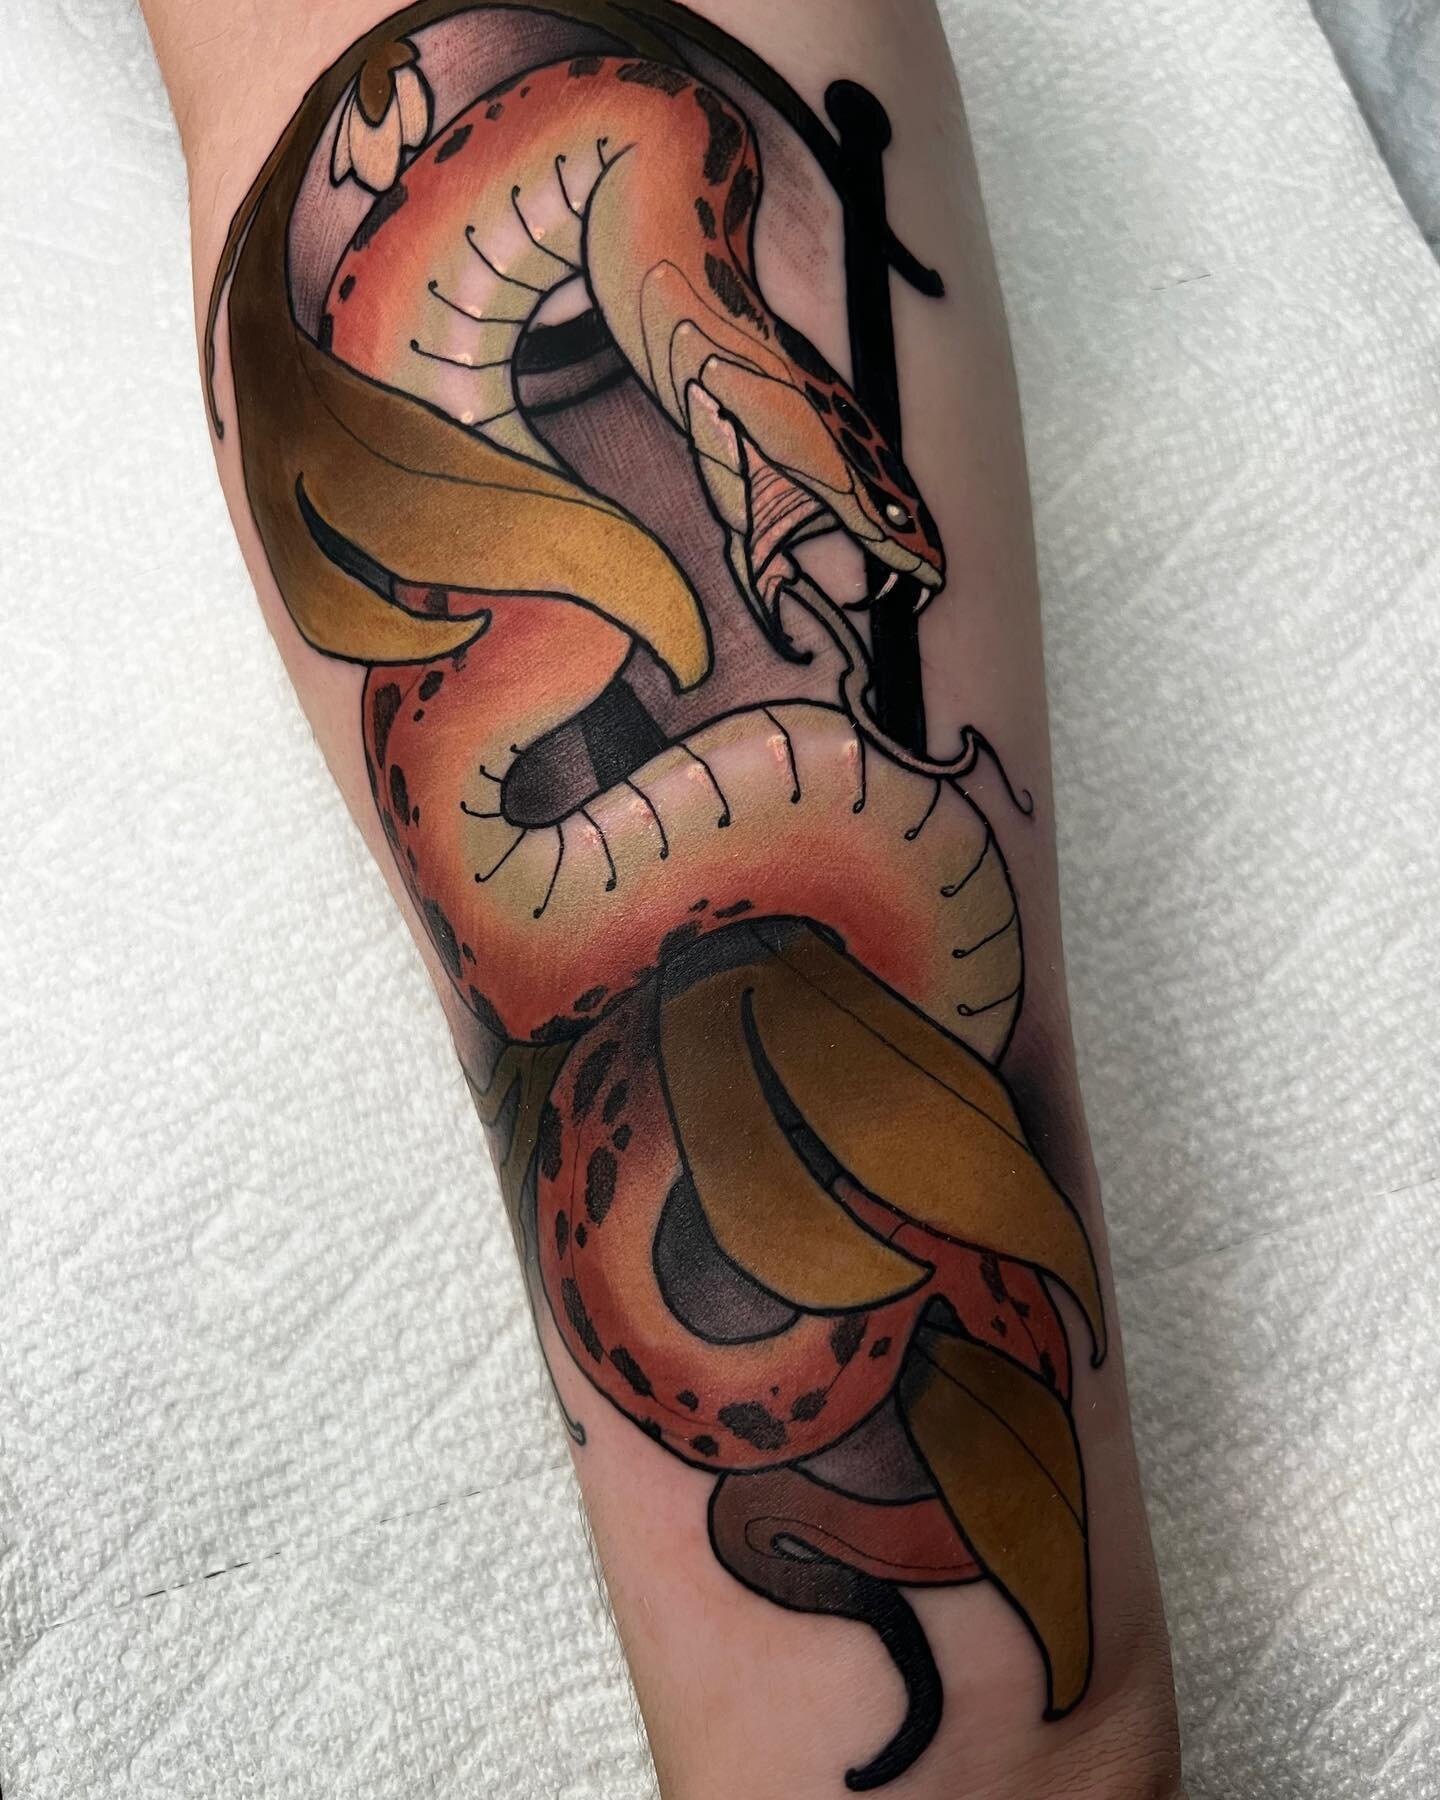 Classic snake done by @jmc.tattoo .
.
.
.
.
.
#neotrad #snaketattoo #neotradsnake #neotradi #neotradsub #neotradworldwide #neotradworld #neotradtattooers #neotraditionaltattooers